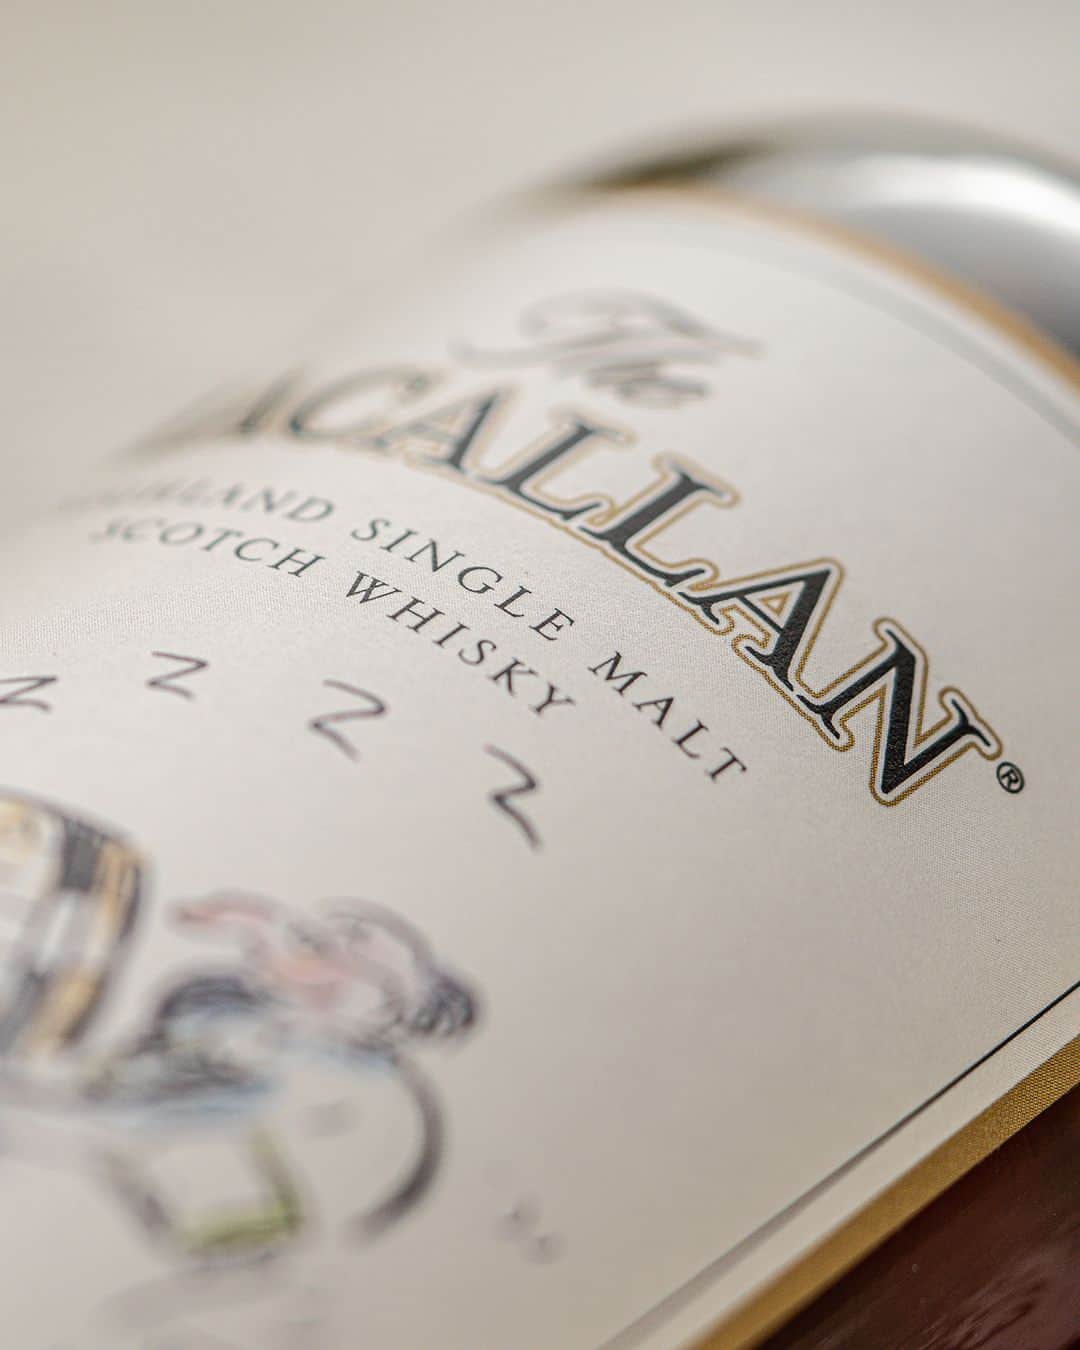 The Macallanのインスタグラム：「Today, Folio 7 breathes new life into this timeless campaign and the illustrations of 'The Boffins Baffled'. It celebrates the rich heritage of The Macallan – and one of our most unforgettable ad campaigns from decades past. The exceptional whisky showcases a golden honey colour, raisins, milk chocolate and orange peel give way to vanilla and baked fruits on the palate, leaving a long,  creamy finish with warm spices.⁣ ⁣ Folio 7 will be available from The Macallan Online Boutique via The Macallan Ballot with delivery to select locations, The Macallan Estate Bar and premium retailers, bars and restaurants around the world from April 2023. There will be limited availability worldwide.⁣ ⁣ Crafted without compromise. Please savour The Macallan responsibly.⁣ ⁣ #TheMacallan #Folio7」